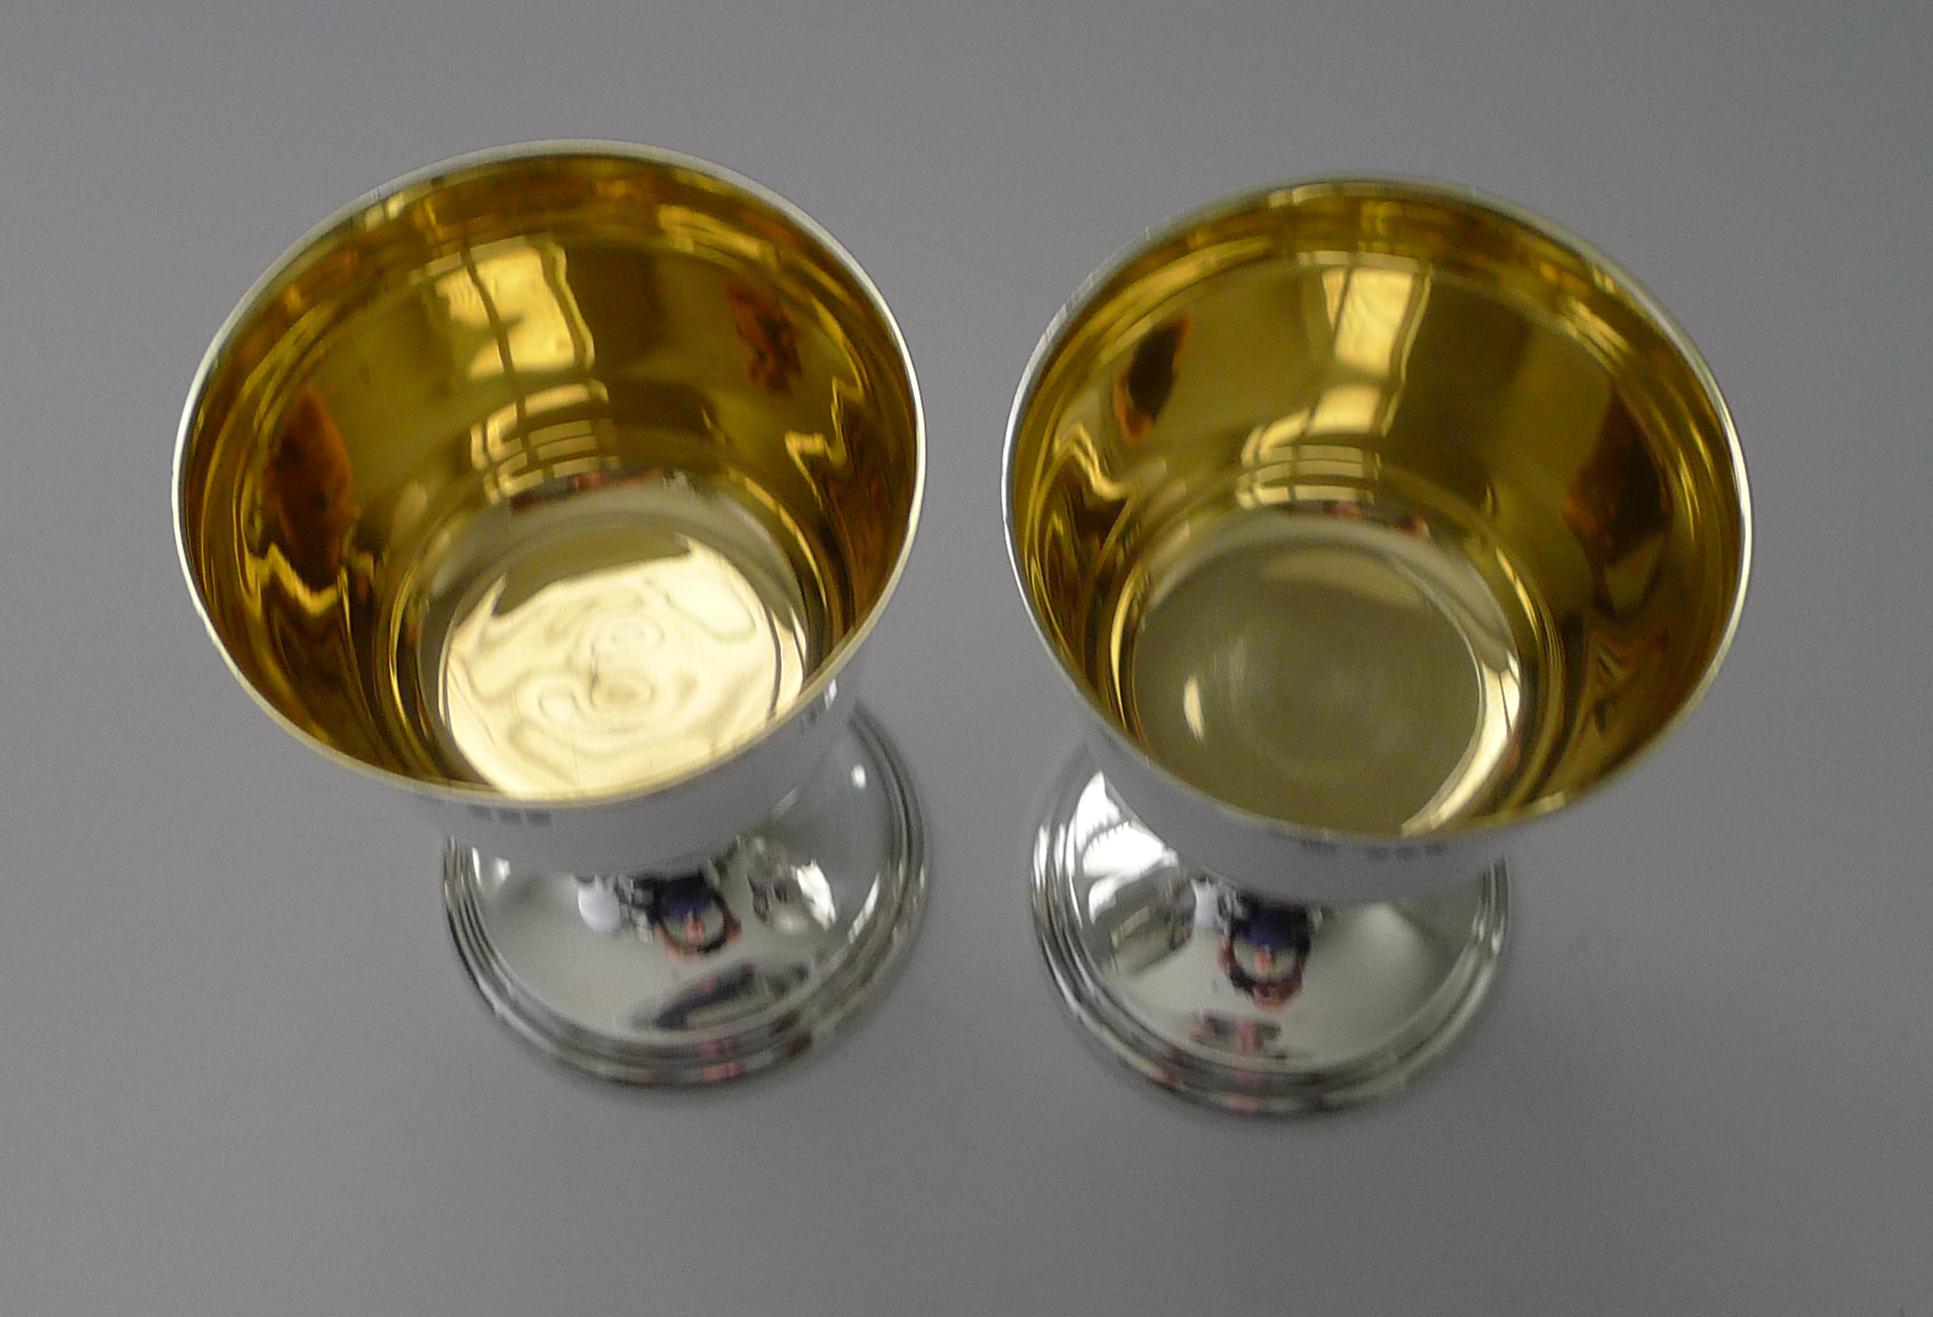 A magnificent pair of vintage solid sterling silver wine goblets, a good size, each standing 5 1/2